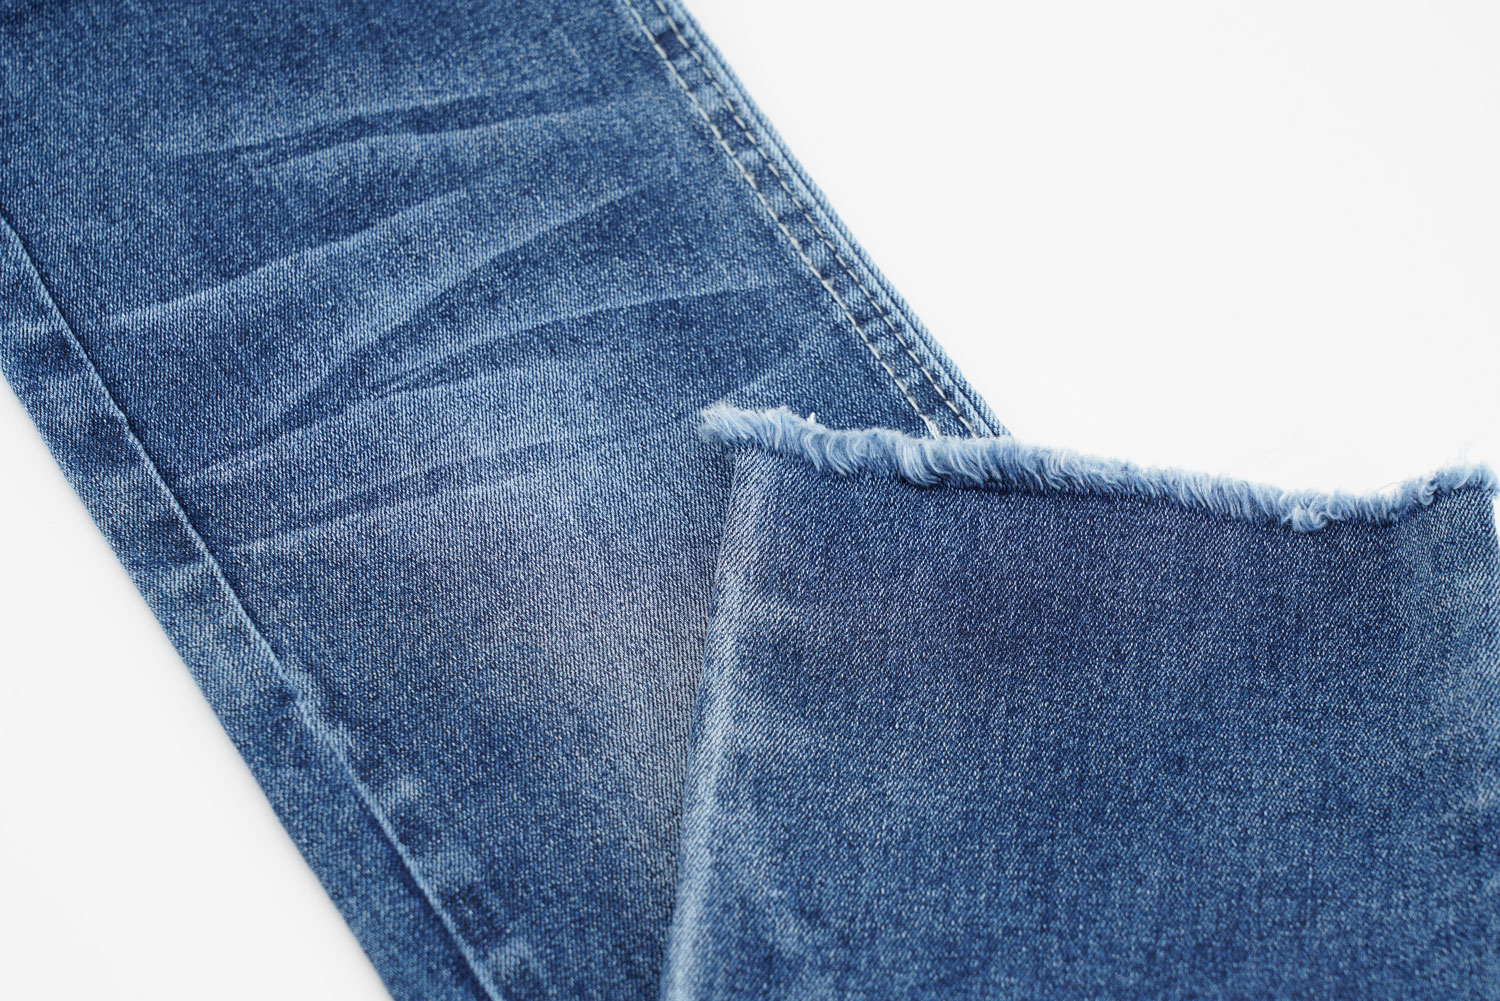 Jeans Have Been Enduring Since the 1970s 2